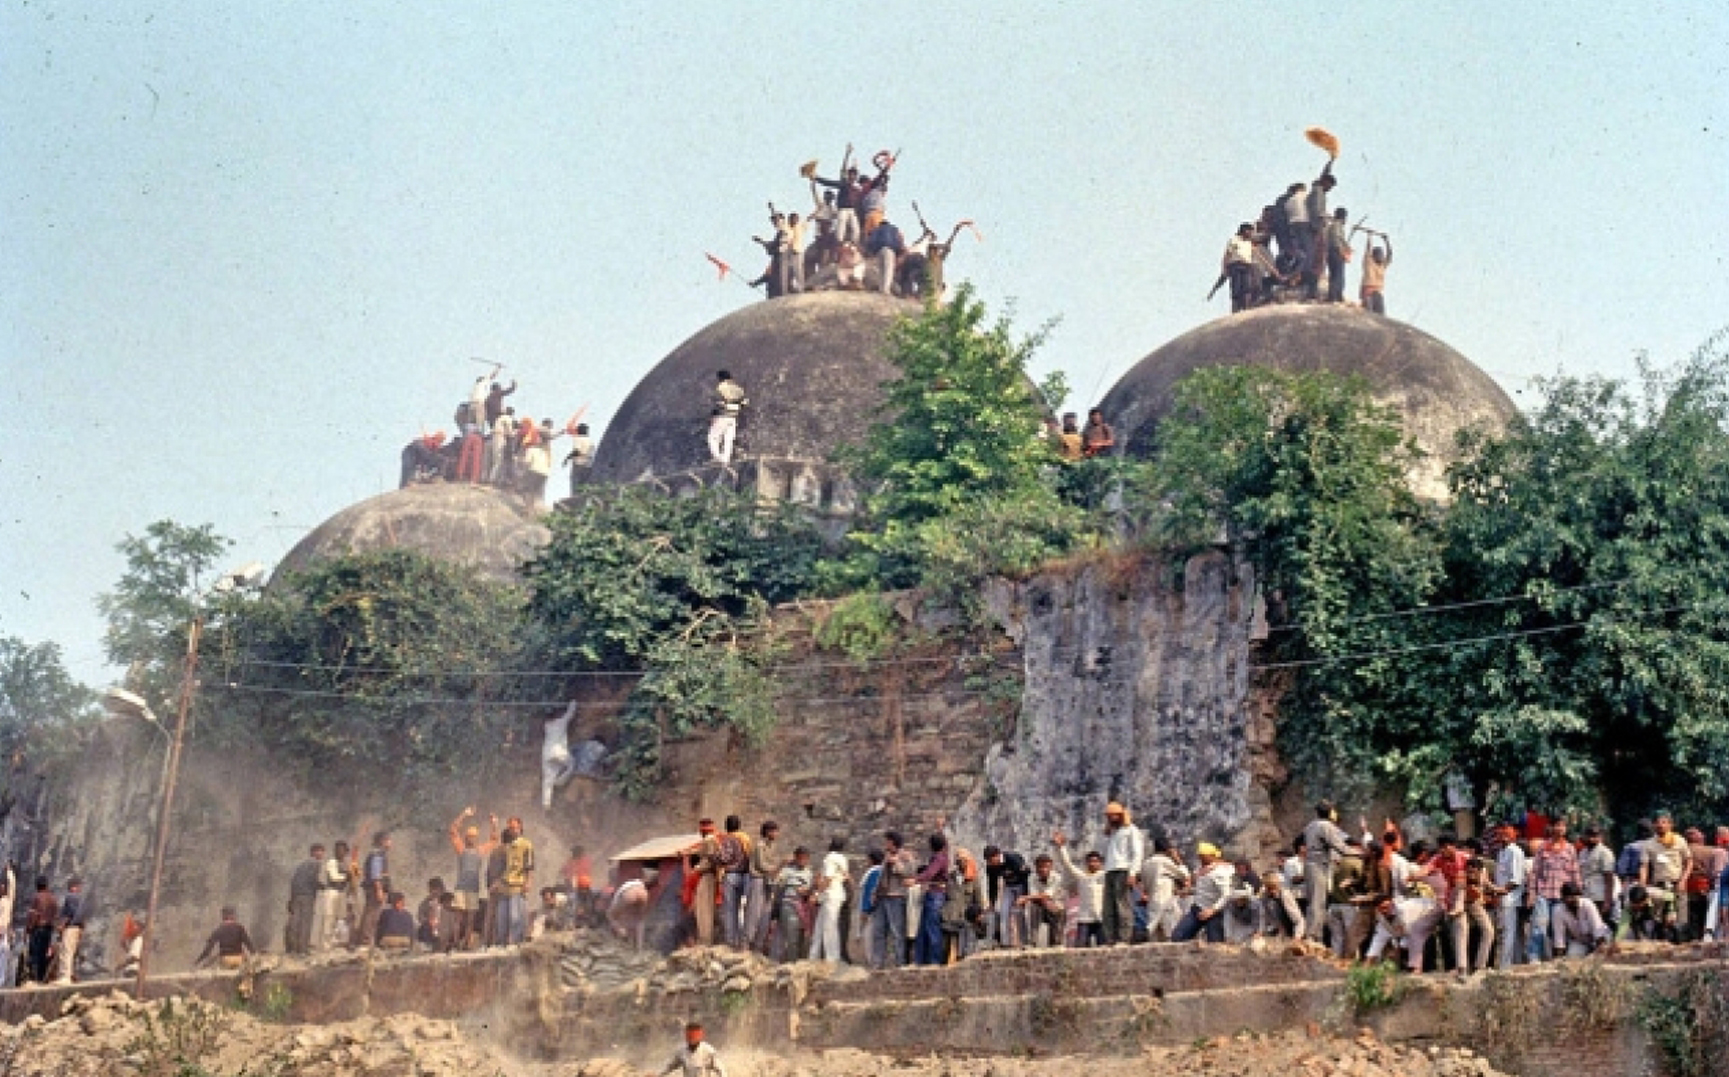 Why are BJP leaders quiet on Ayodhya judgment